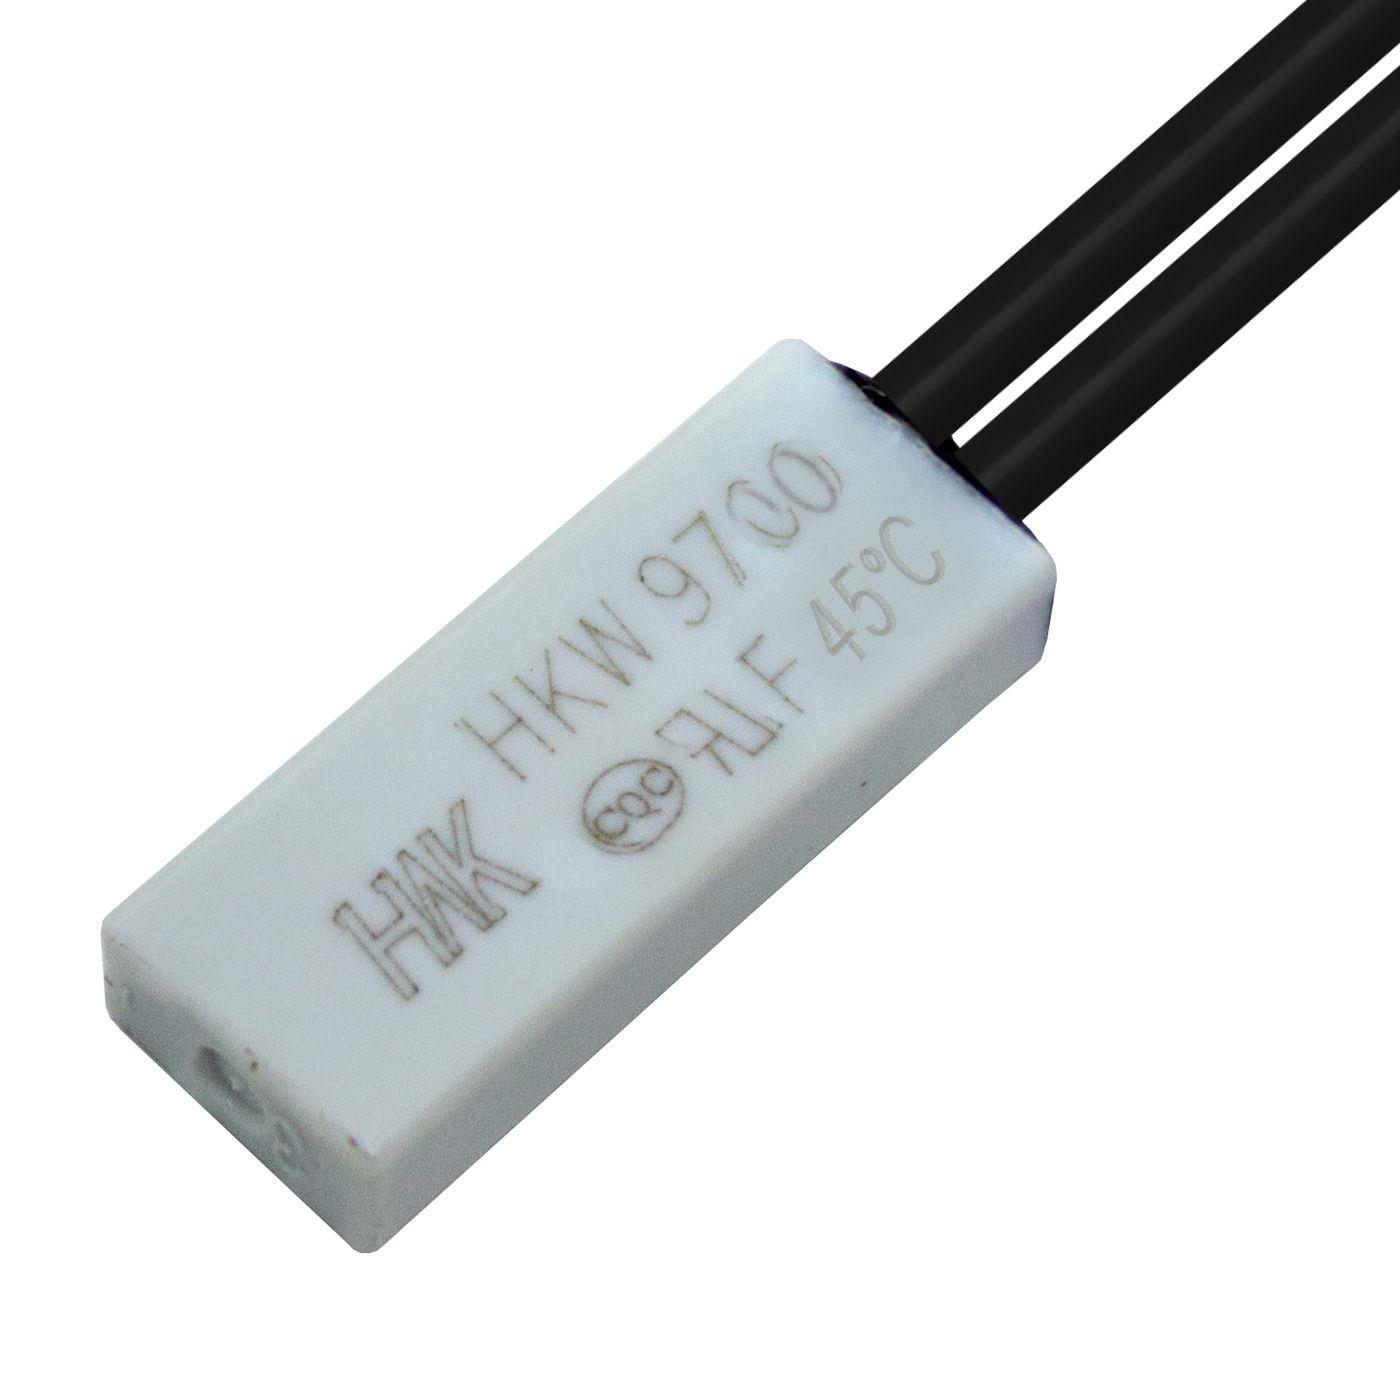 Thermal switch 45°C NC contact 250V 5A Cable Temperature switch thermostat Bimetal Thermal protection